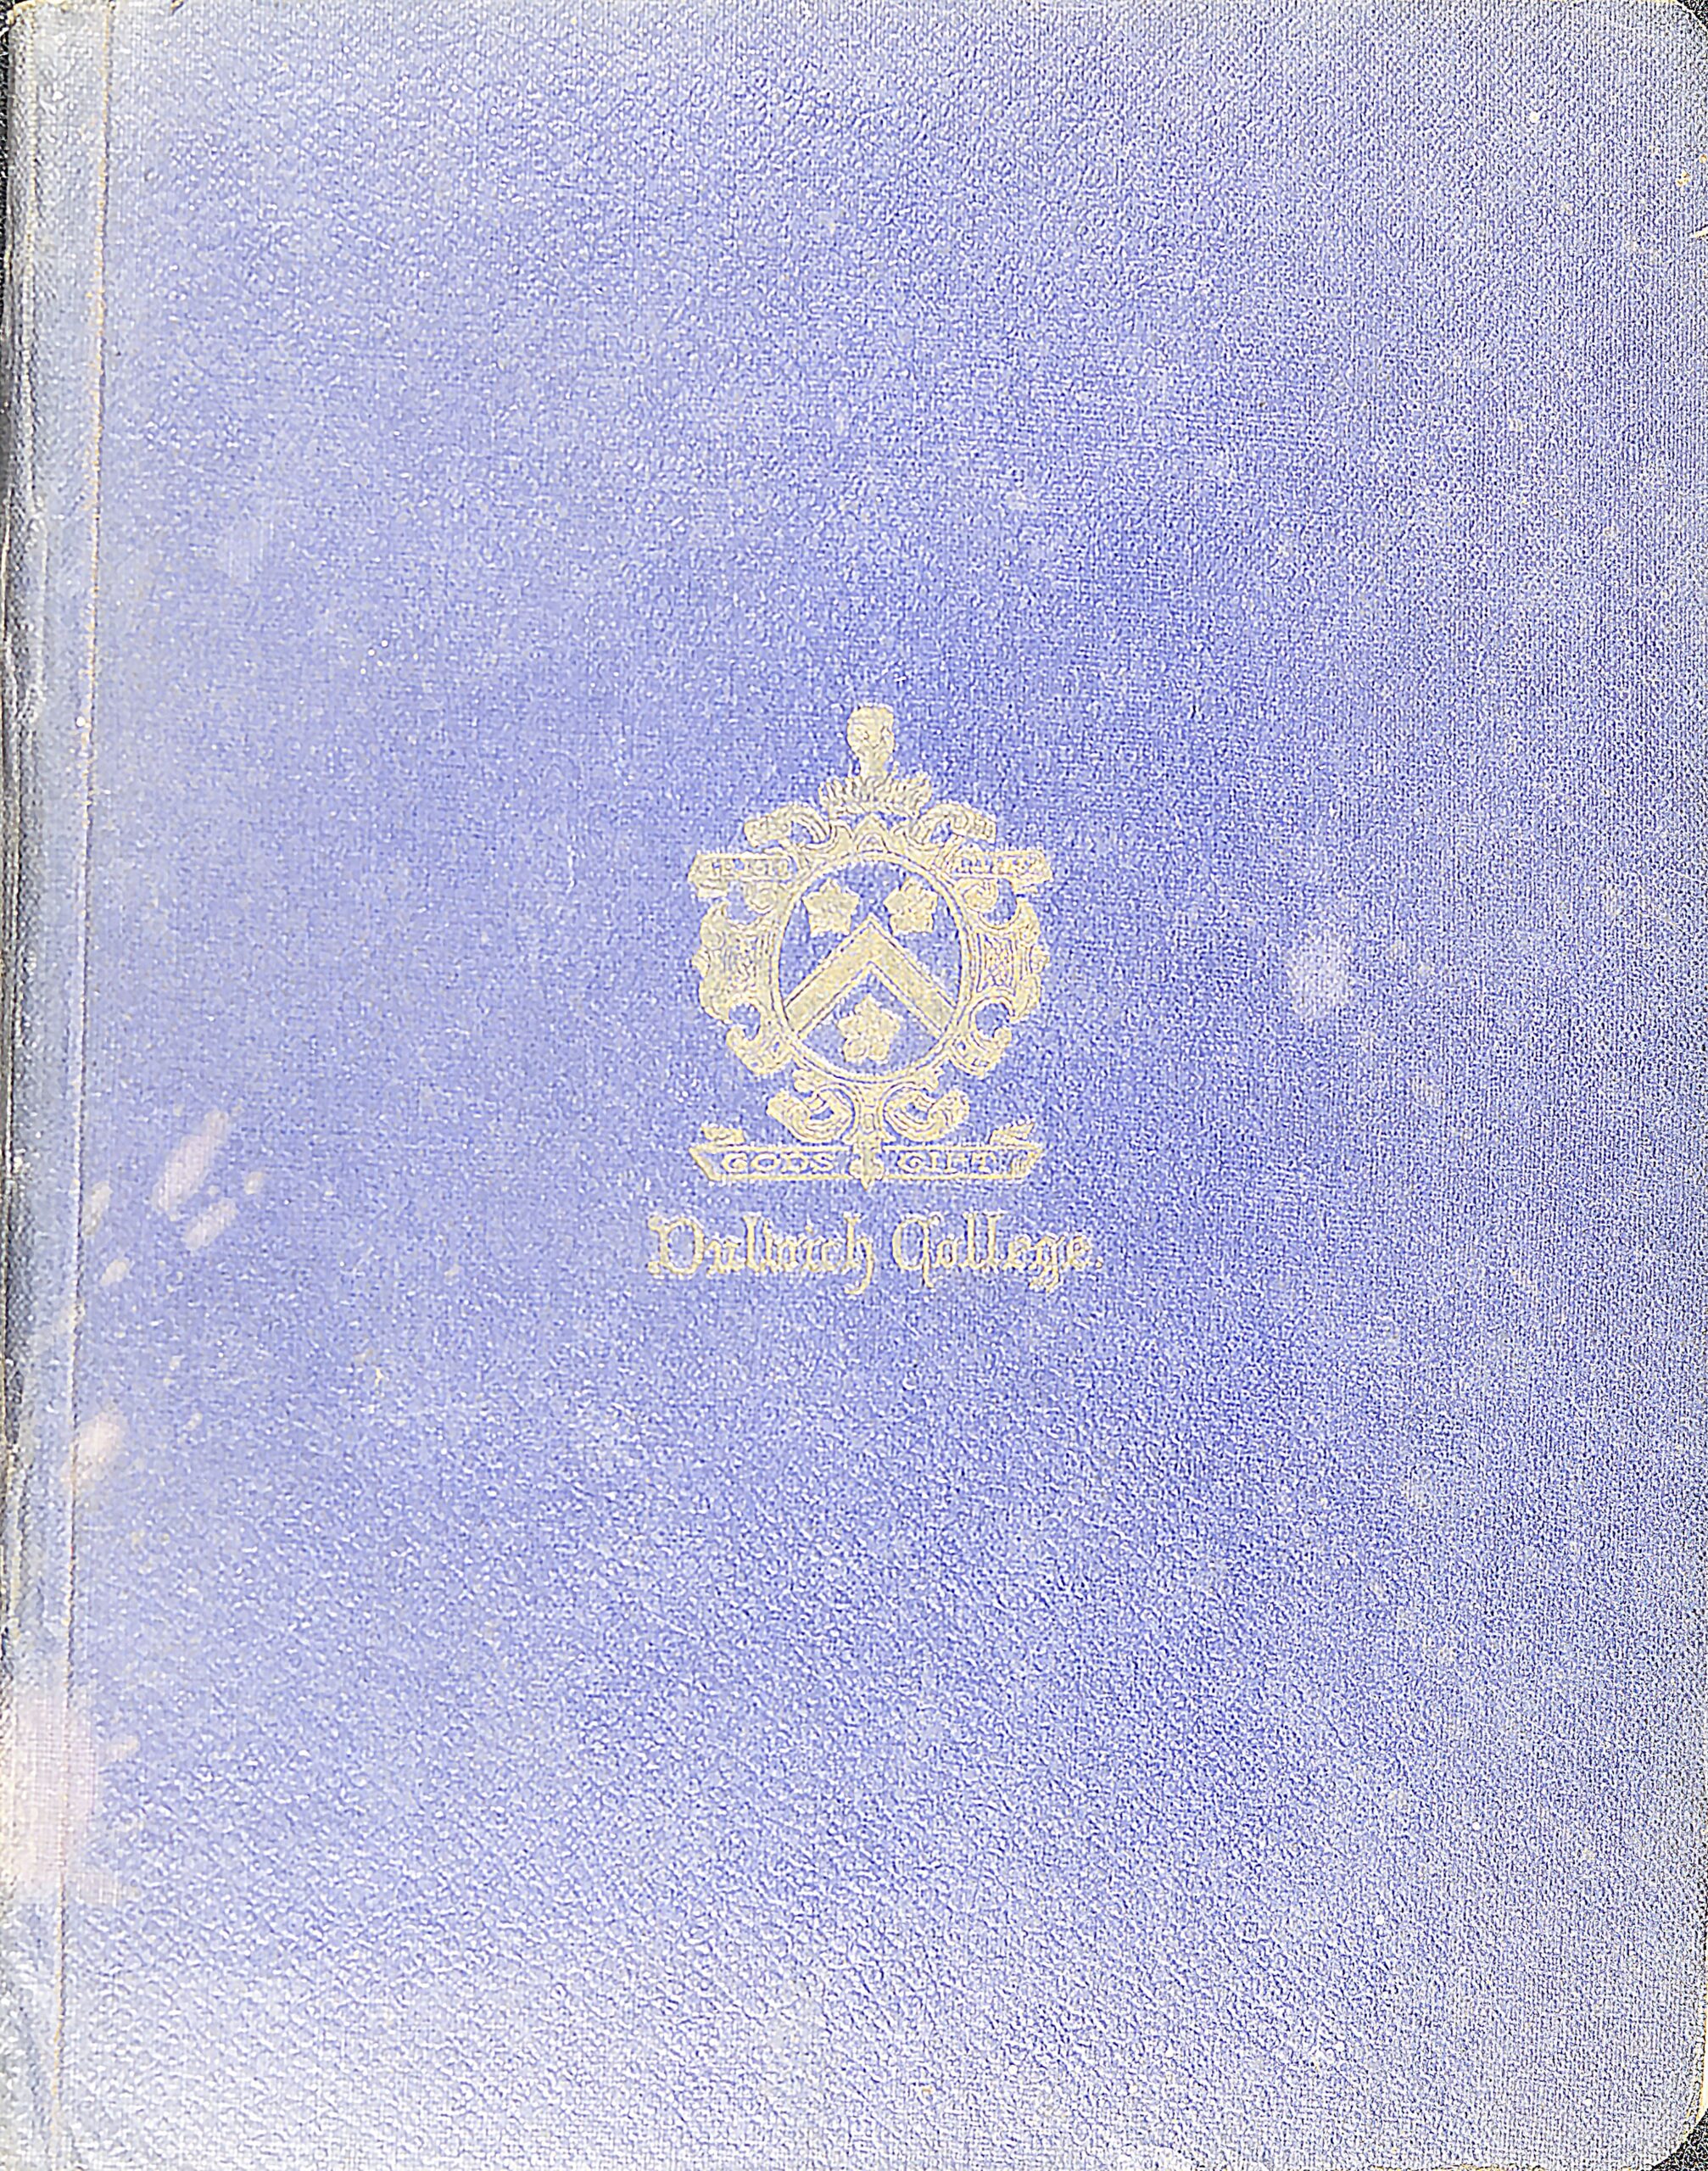 Blue notebook with the Dulwich College coat of arms and 'Dulwich College' written on it in gold lettering.